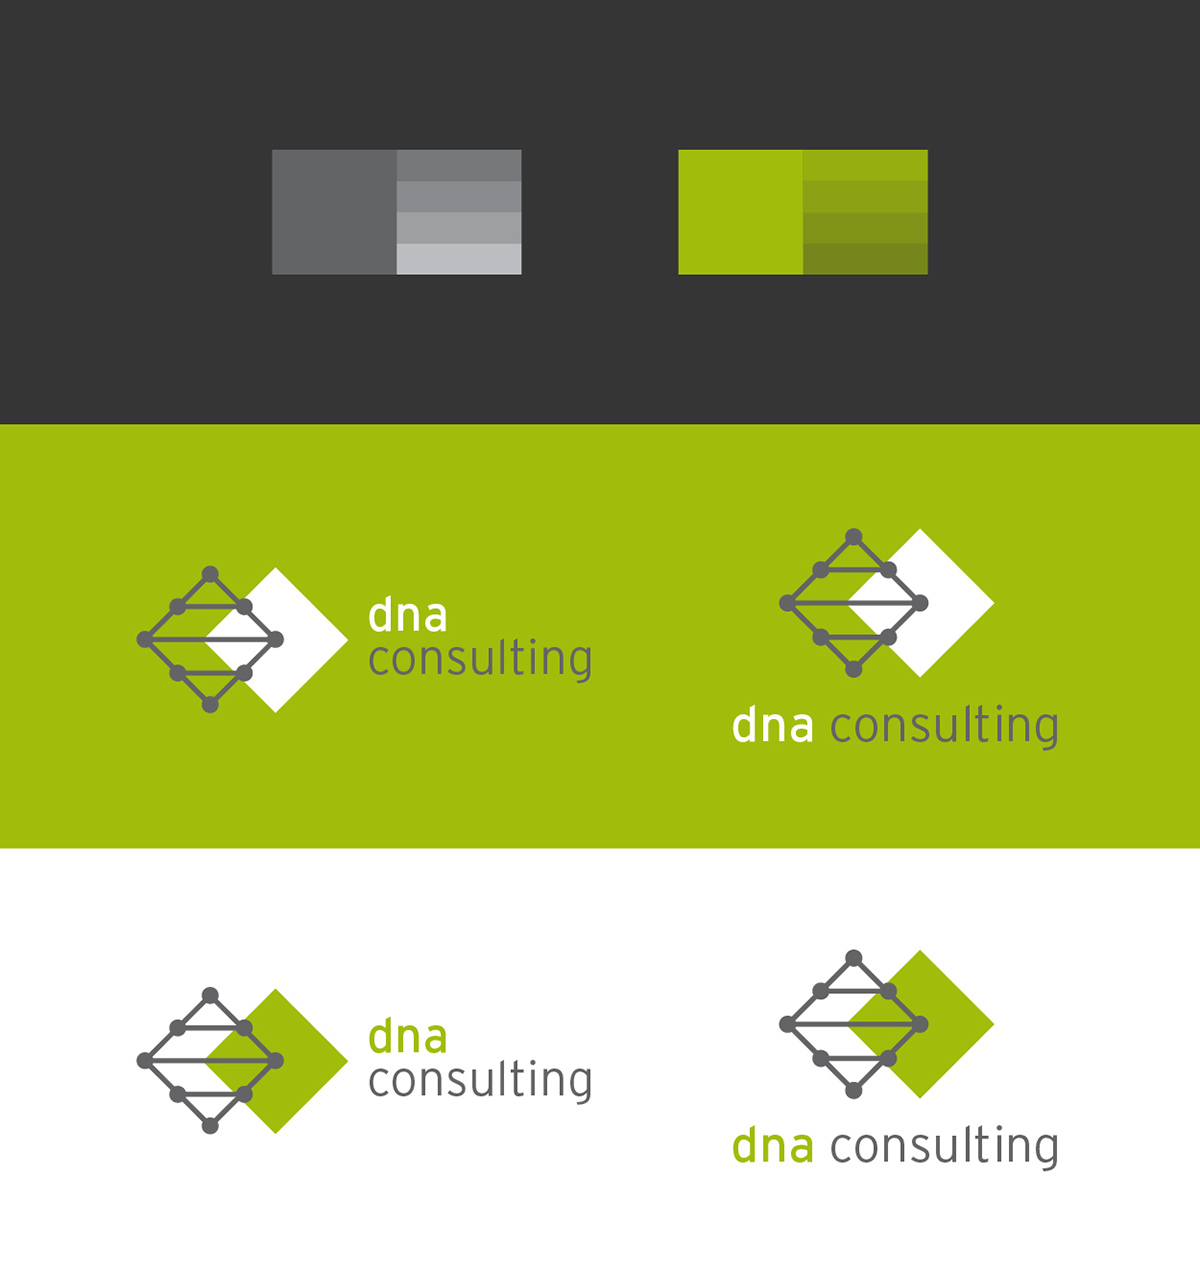 Consulting green energy DNA network consultancy communication